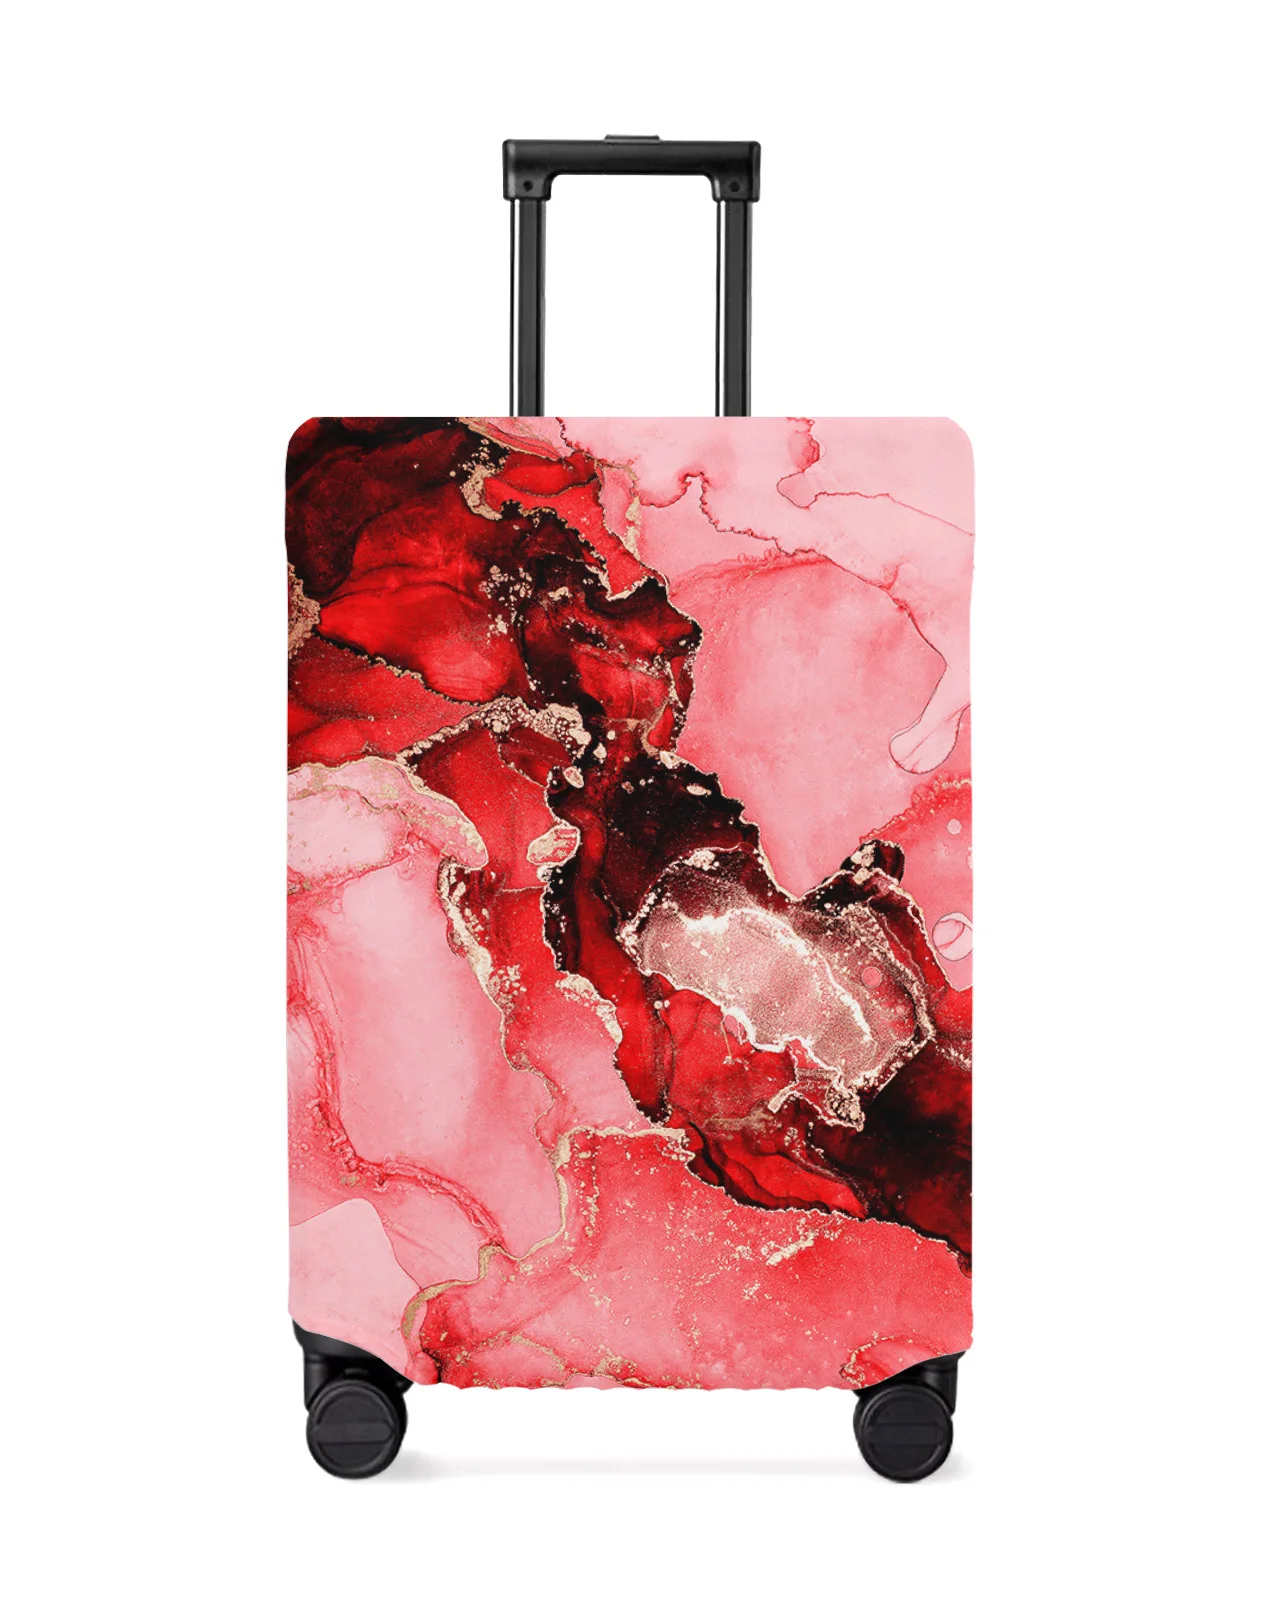 marble-texture-red-travel-luggage-protective-cover-for-18-32-inch-travel-accessories-suitcase-elastic-dust-case-protect-sleeve